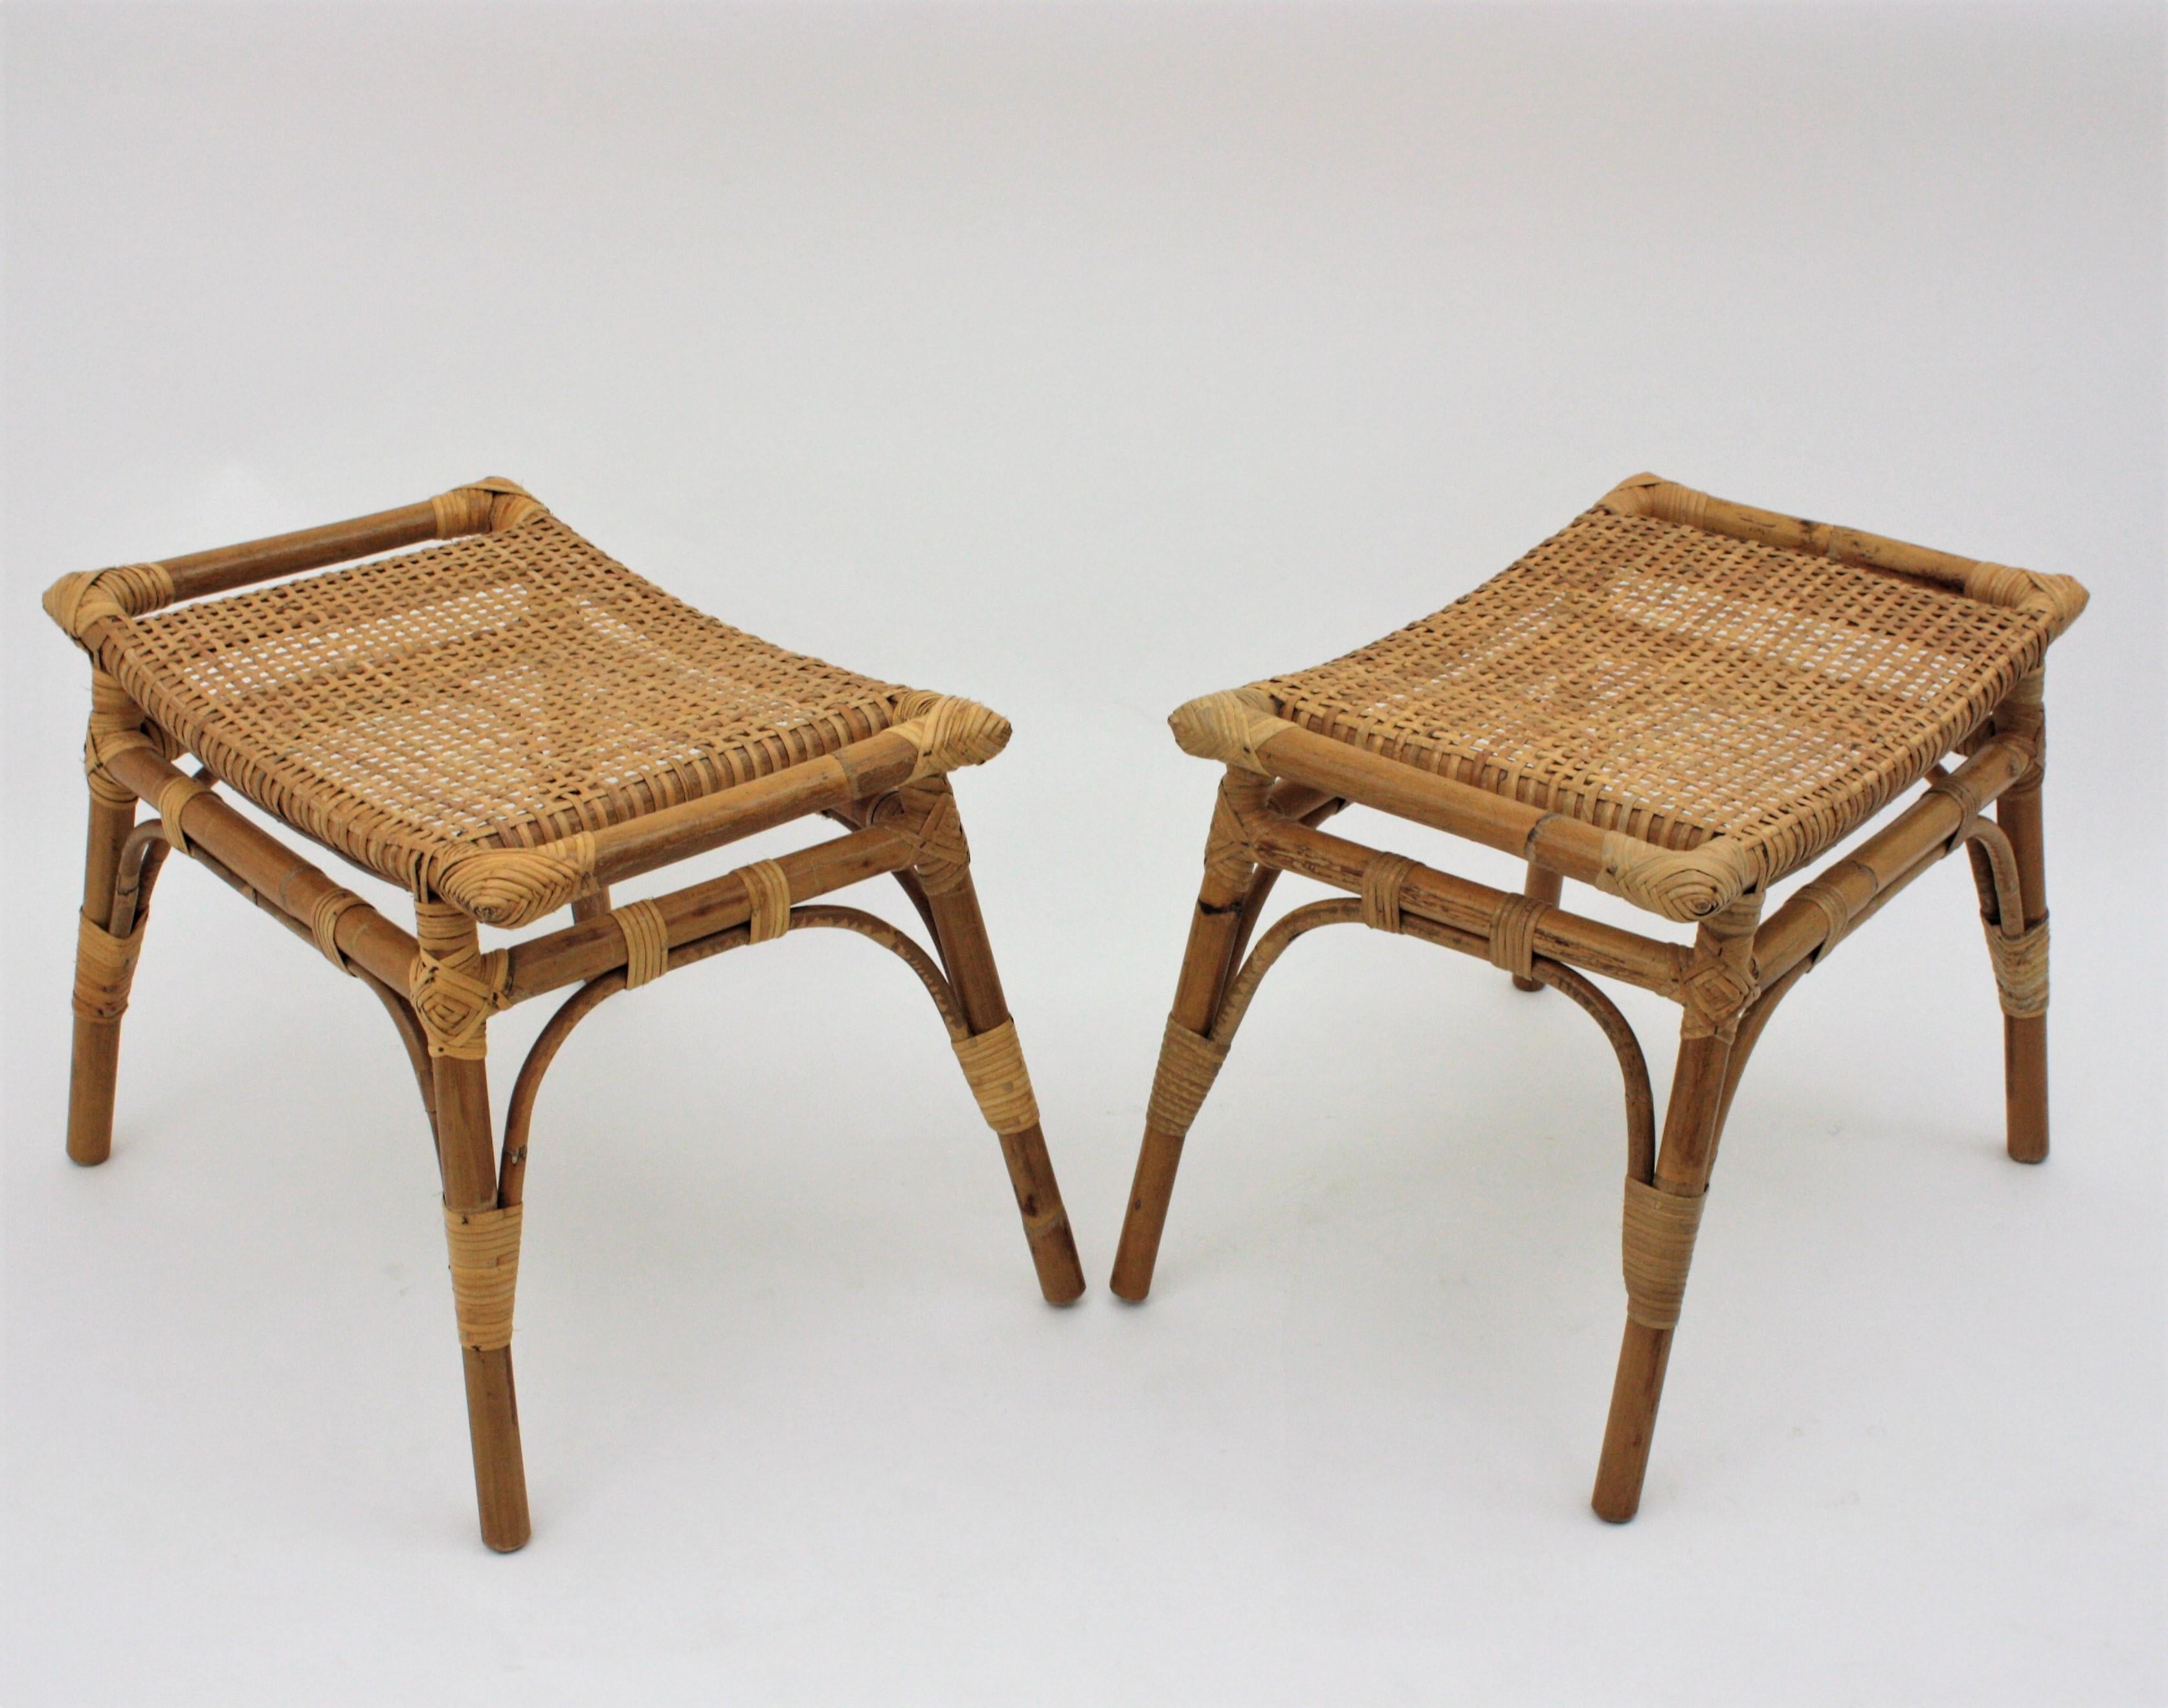 20th Century Pair of Bamboo Stools, Benches or Ottoman with Woven Wicker Cane Seats